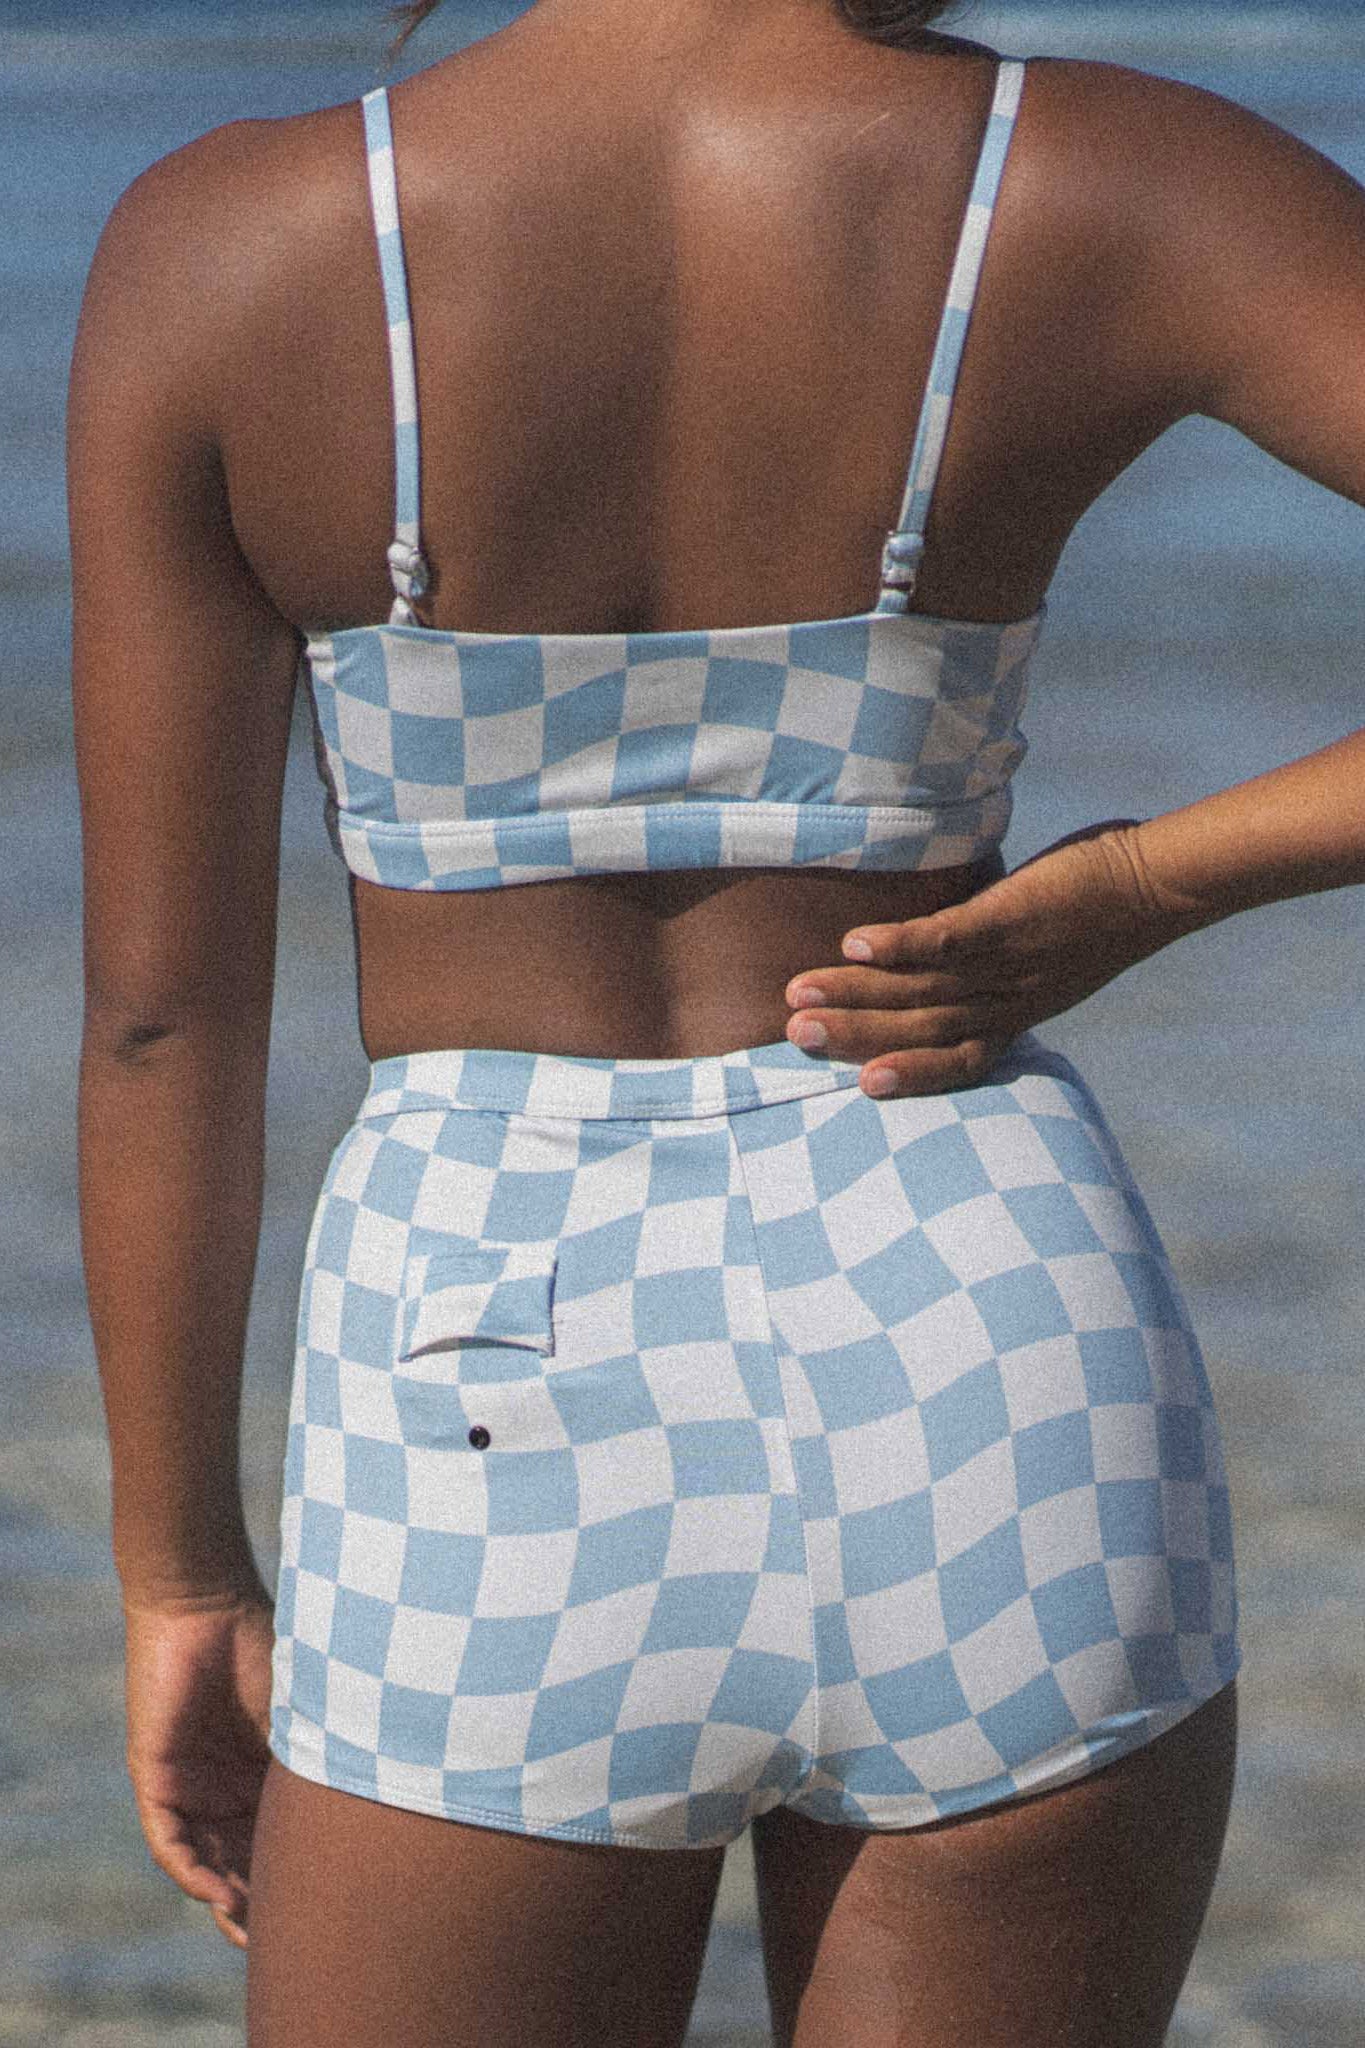 Model at the beach wearing the Putu boy bottoms in blue check print